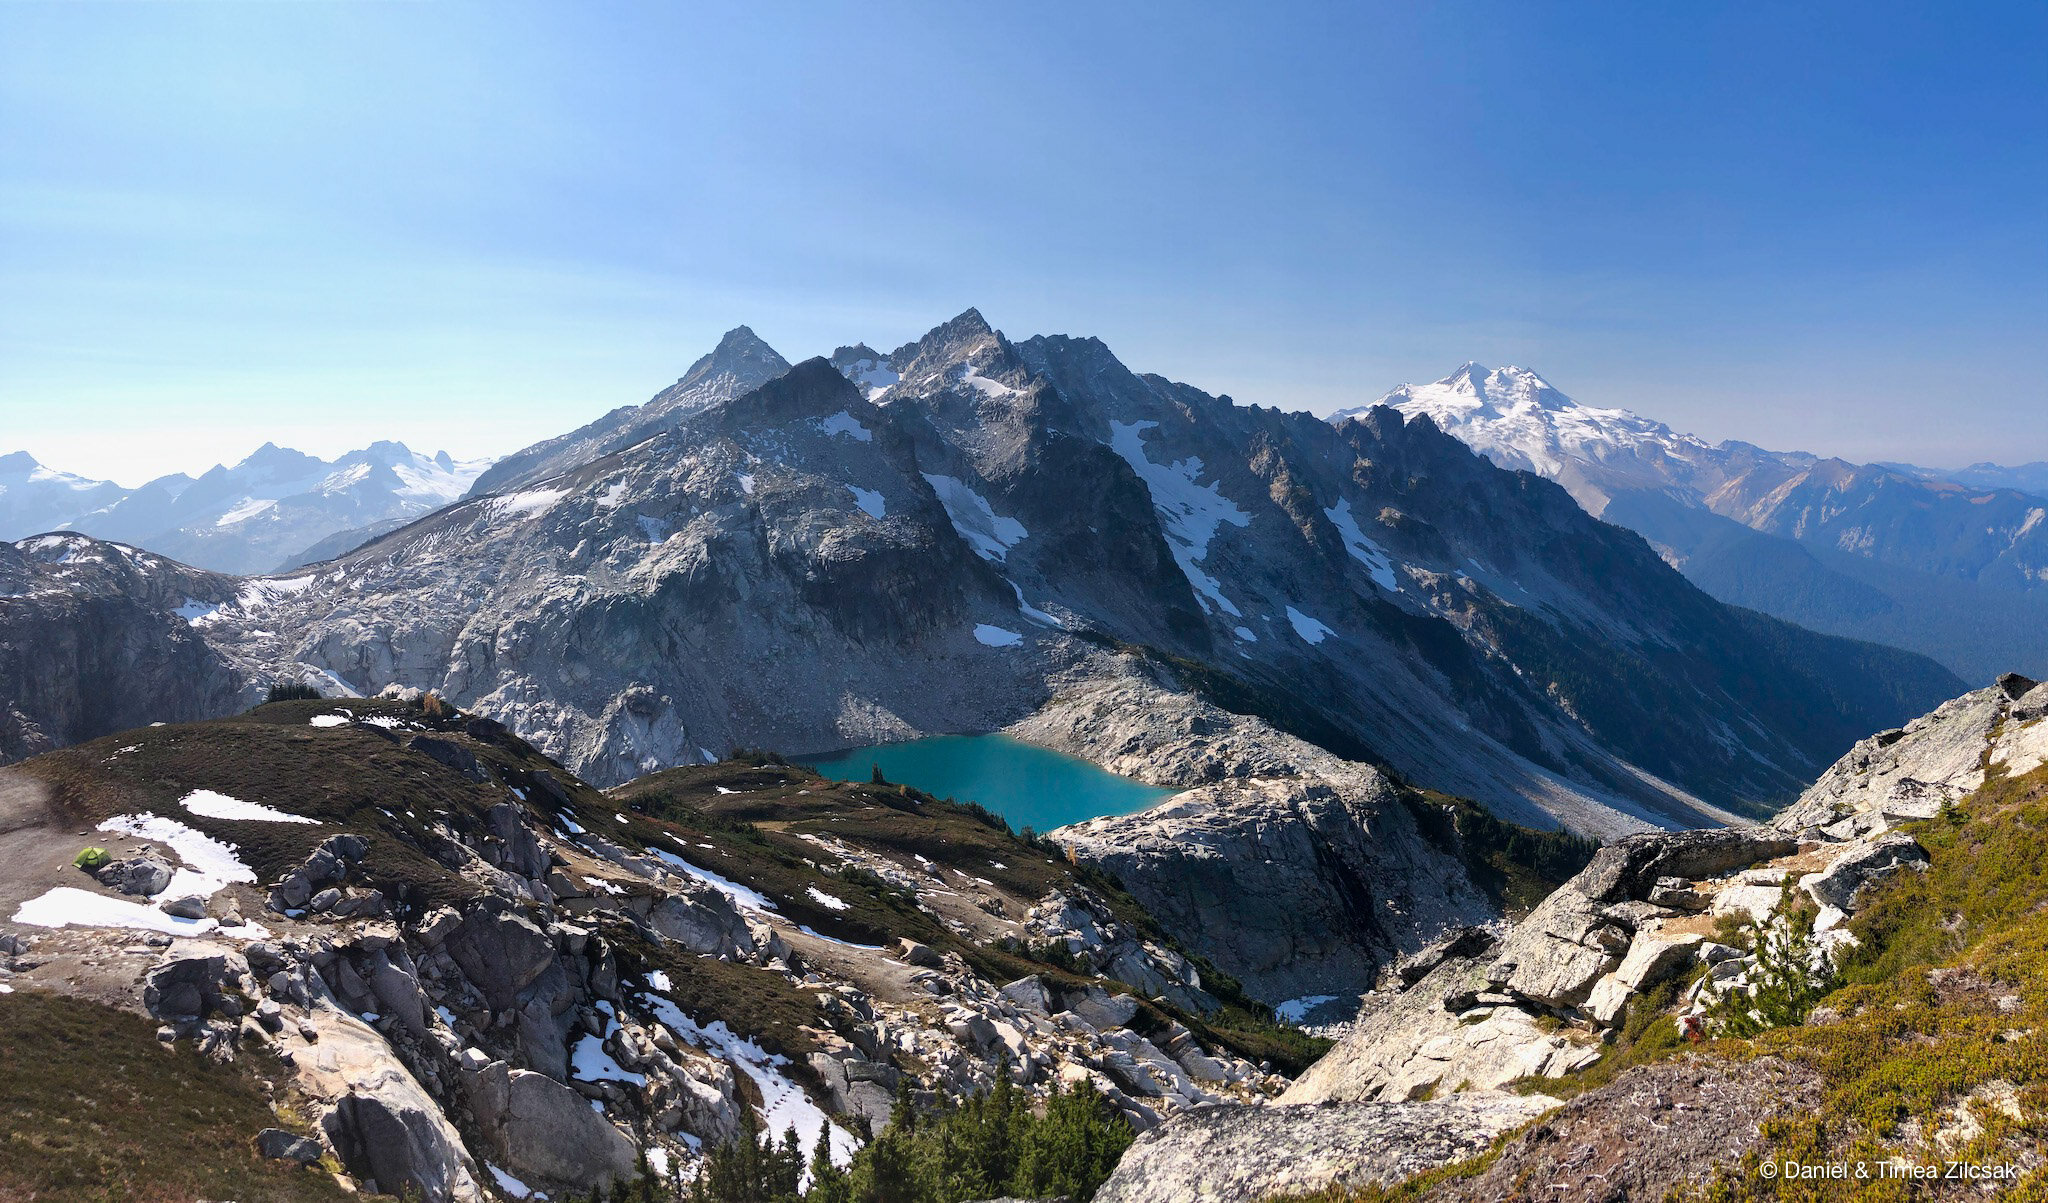 Triad Lake and Glacier Peak seen from the trail to High Pass